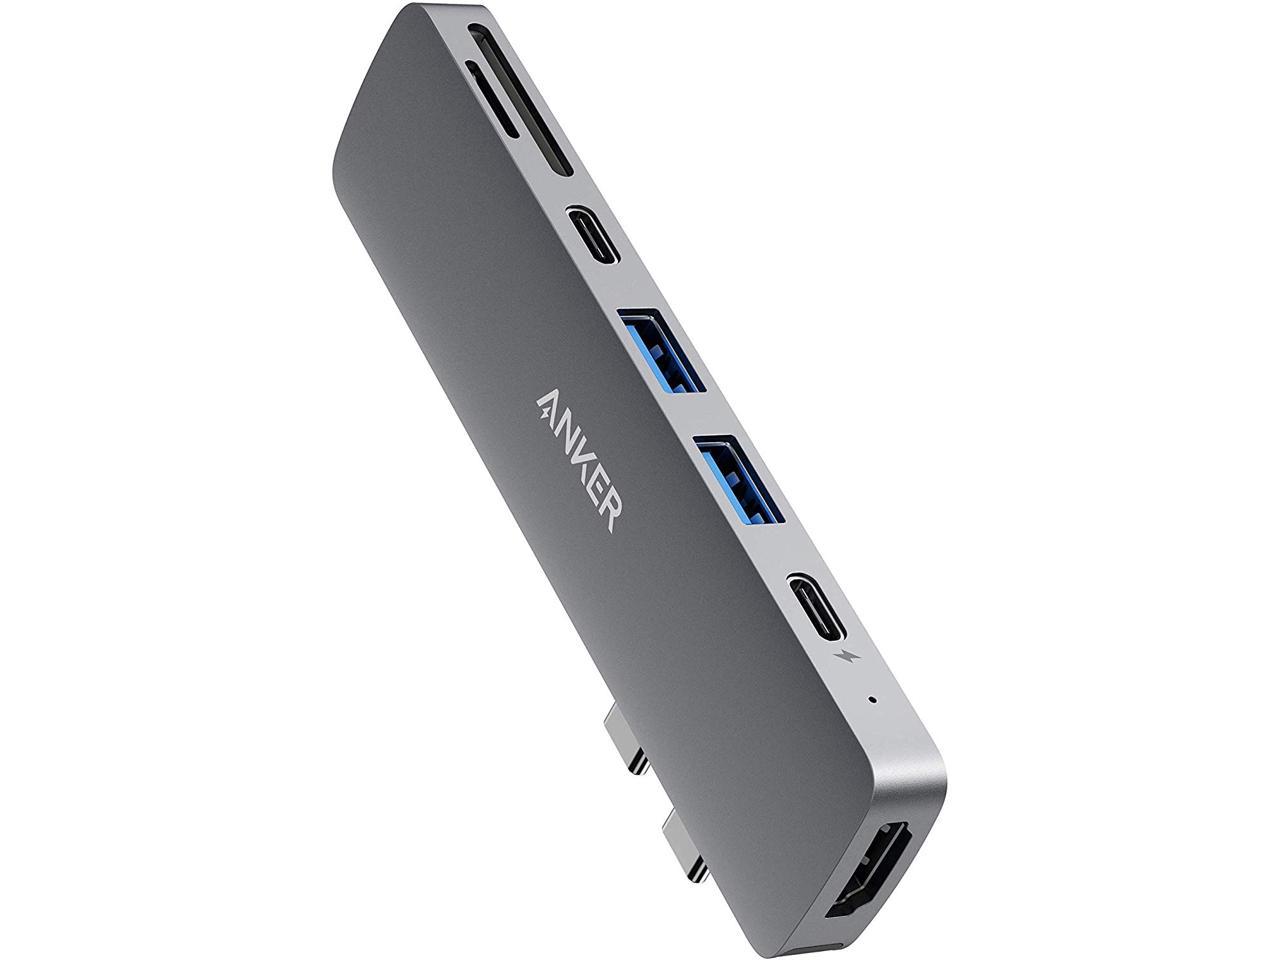 Anker USB C Hub for MacBook, PowerExpand Direct 7-in-2 USB C Adapter, with Thunderbolt 3 USB C Port (100W Power Delivery) $42